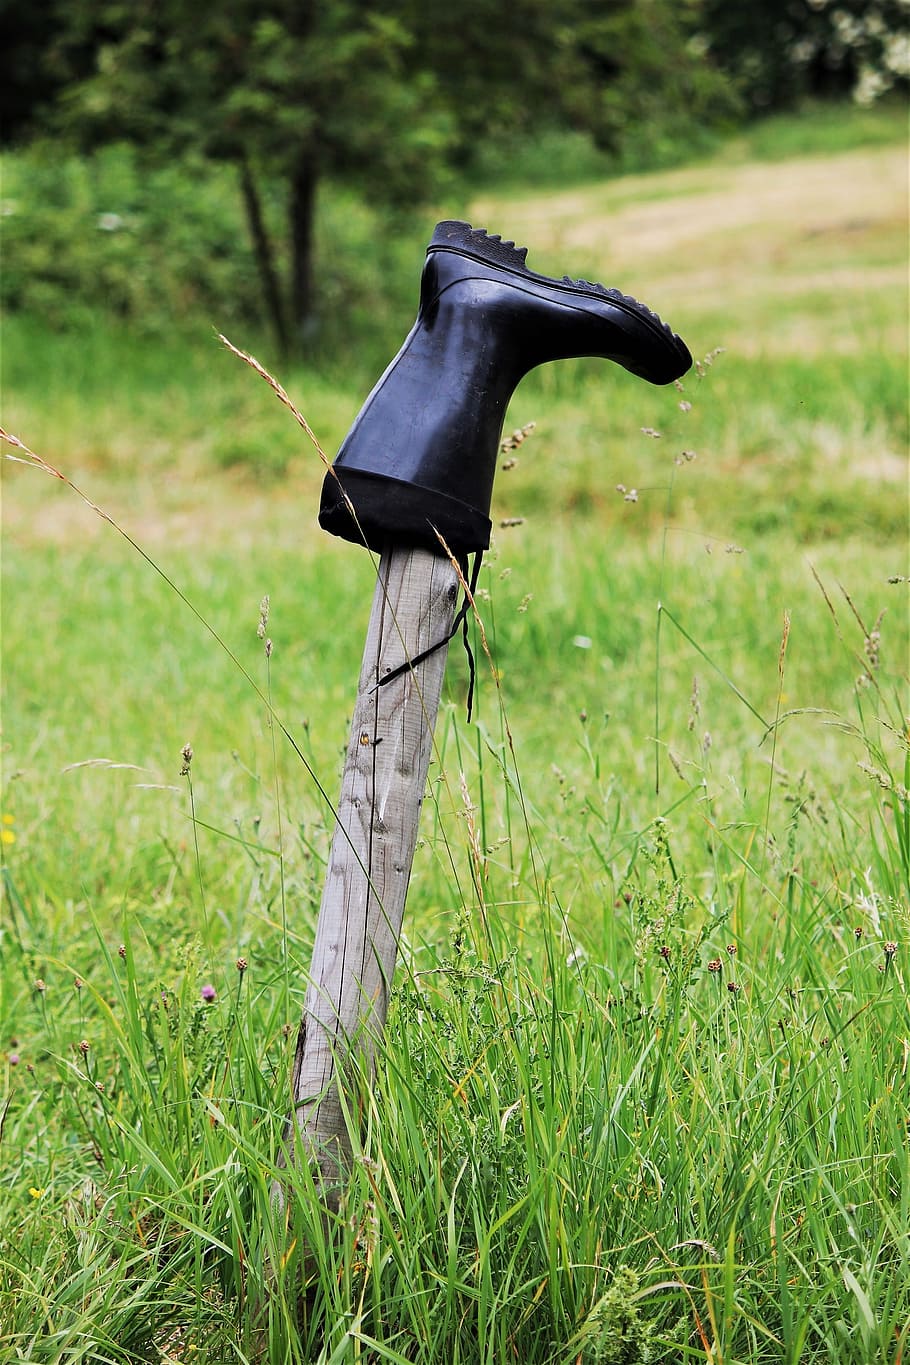 Rubber Boots, Boots, Boots, Shoes, Nature, boots, lost, willow stake, meadow, outdoor, dry